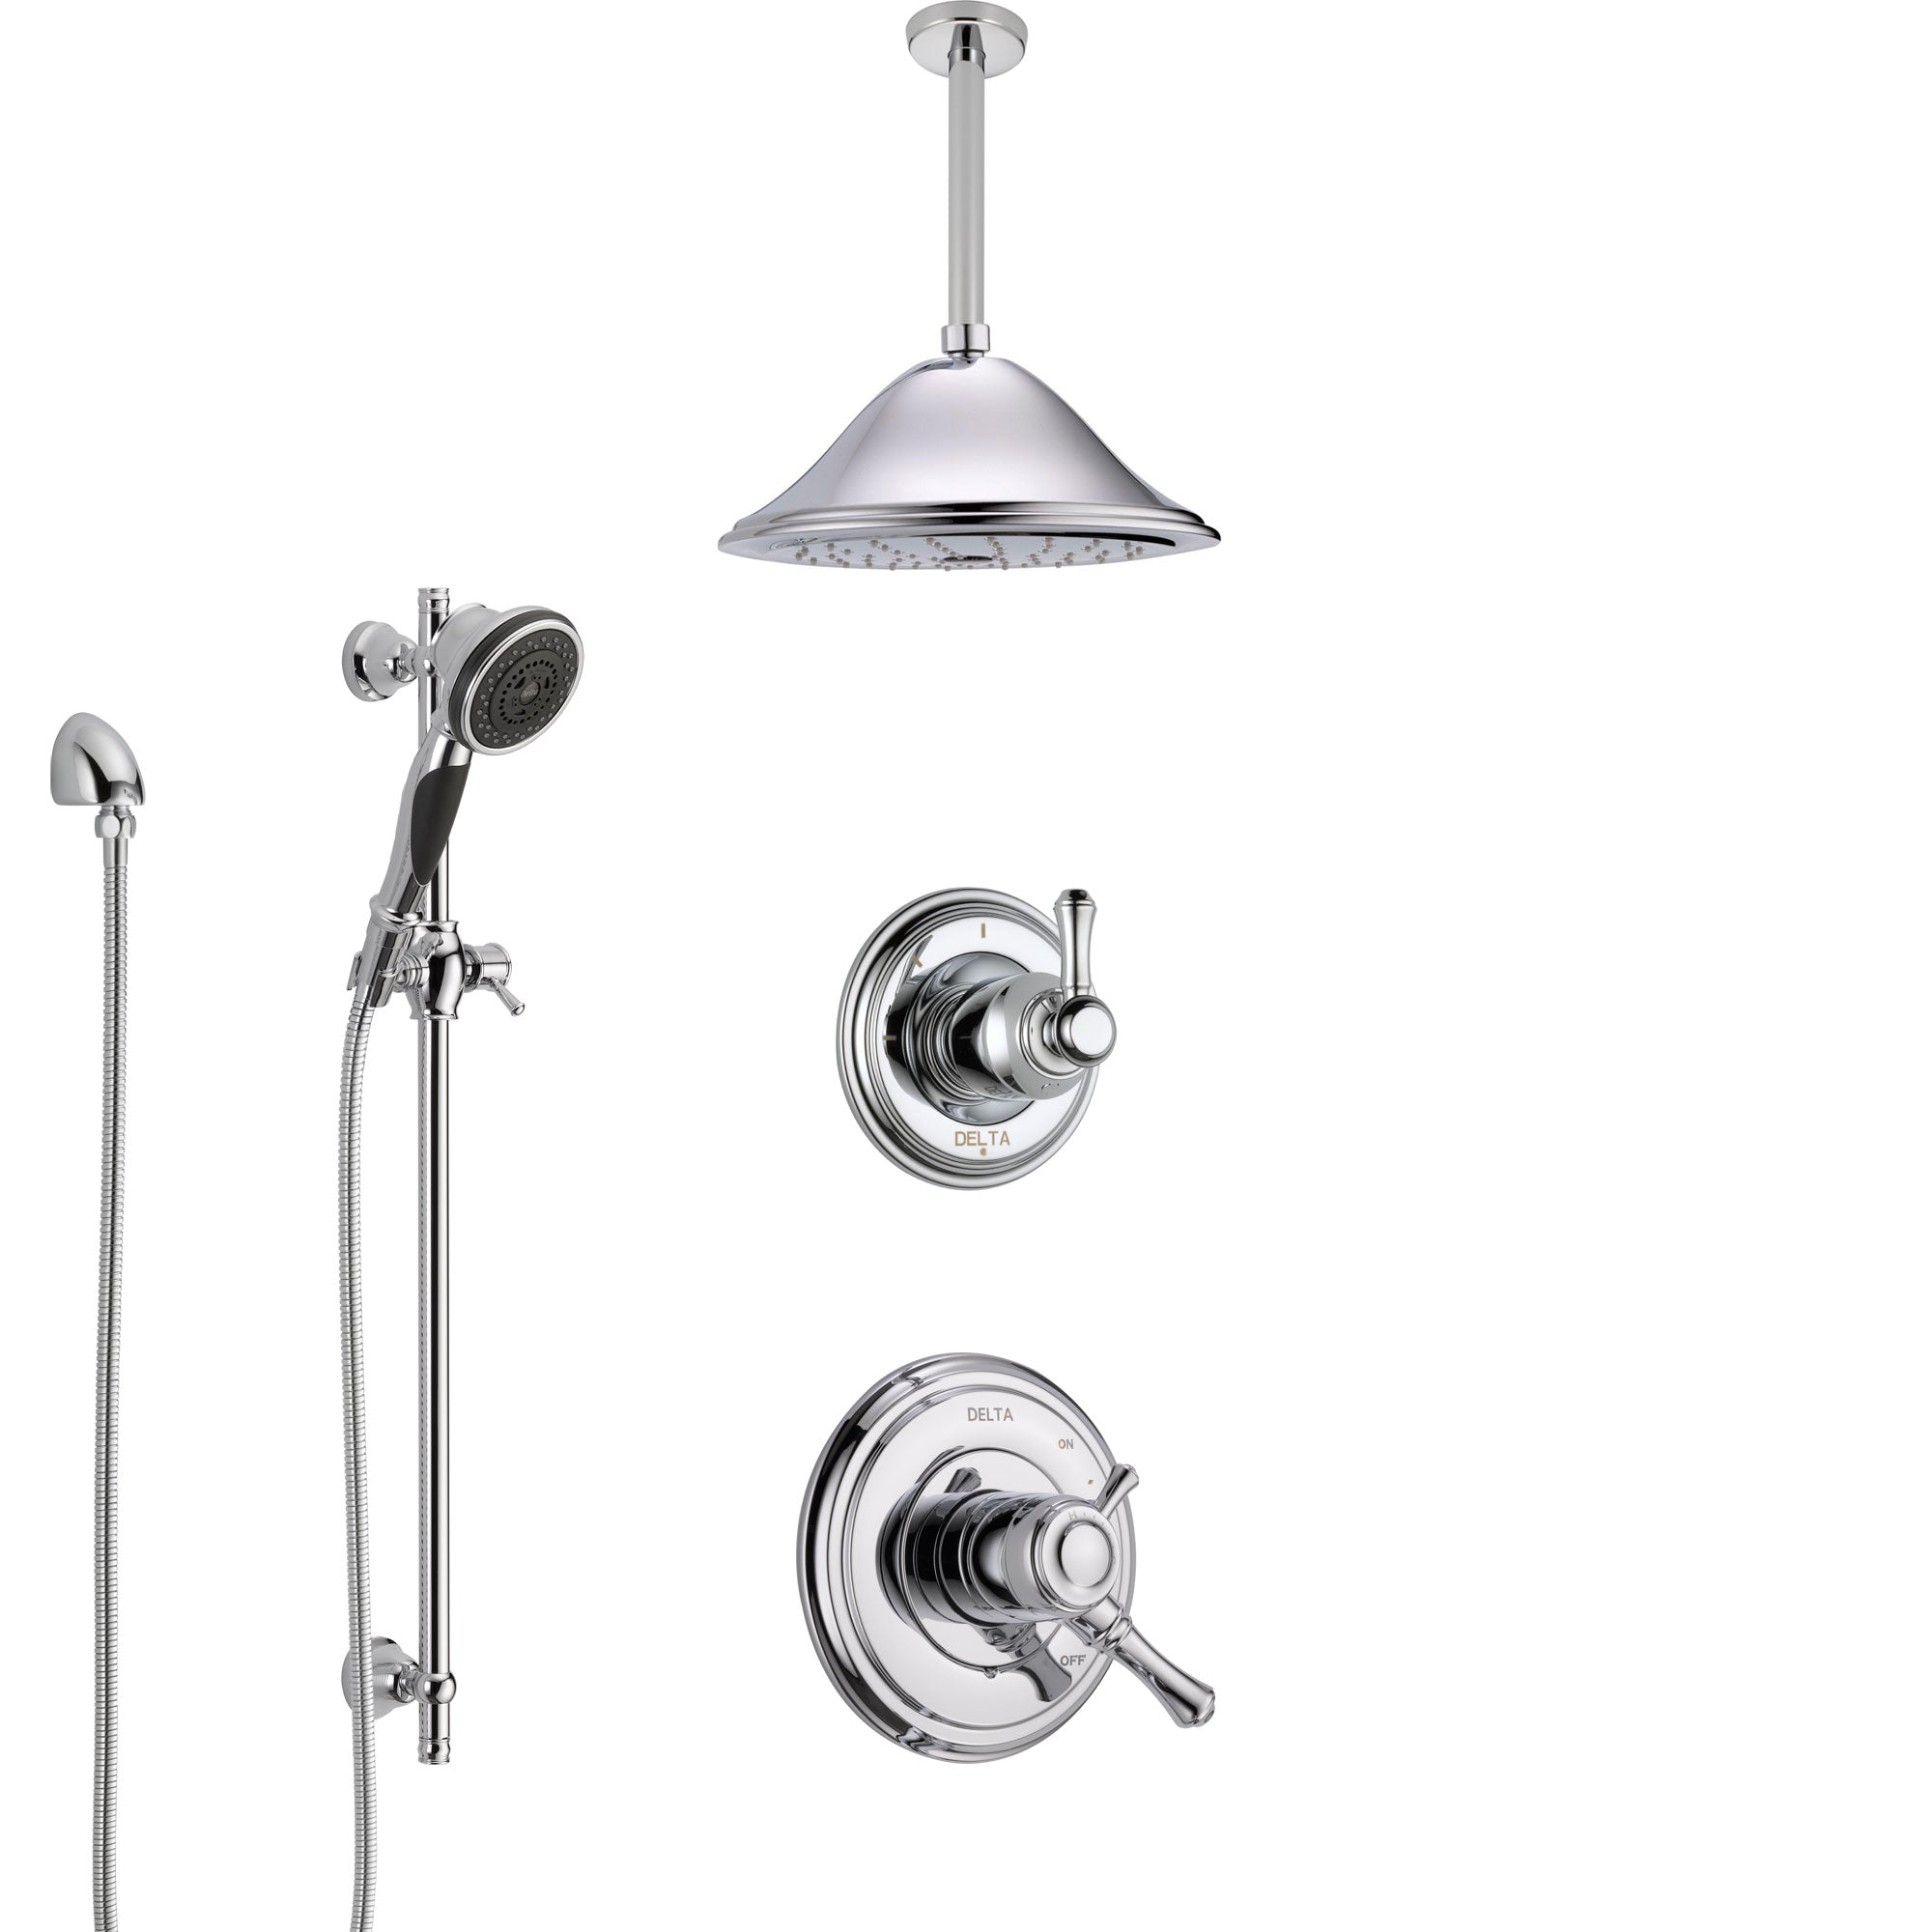 Delta Cassidy Chrome Finish Shower System with Dual Control Handle, Diverter, Ceiling Mount Showerhead, and Hand Shower with Slidebar SS17973